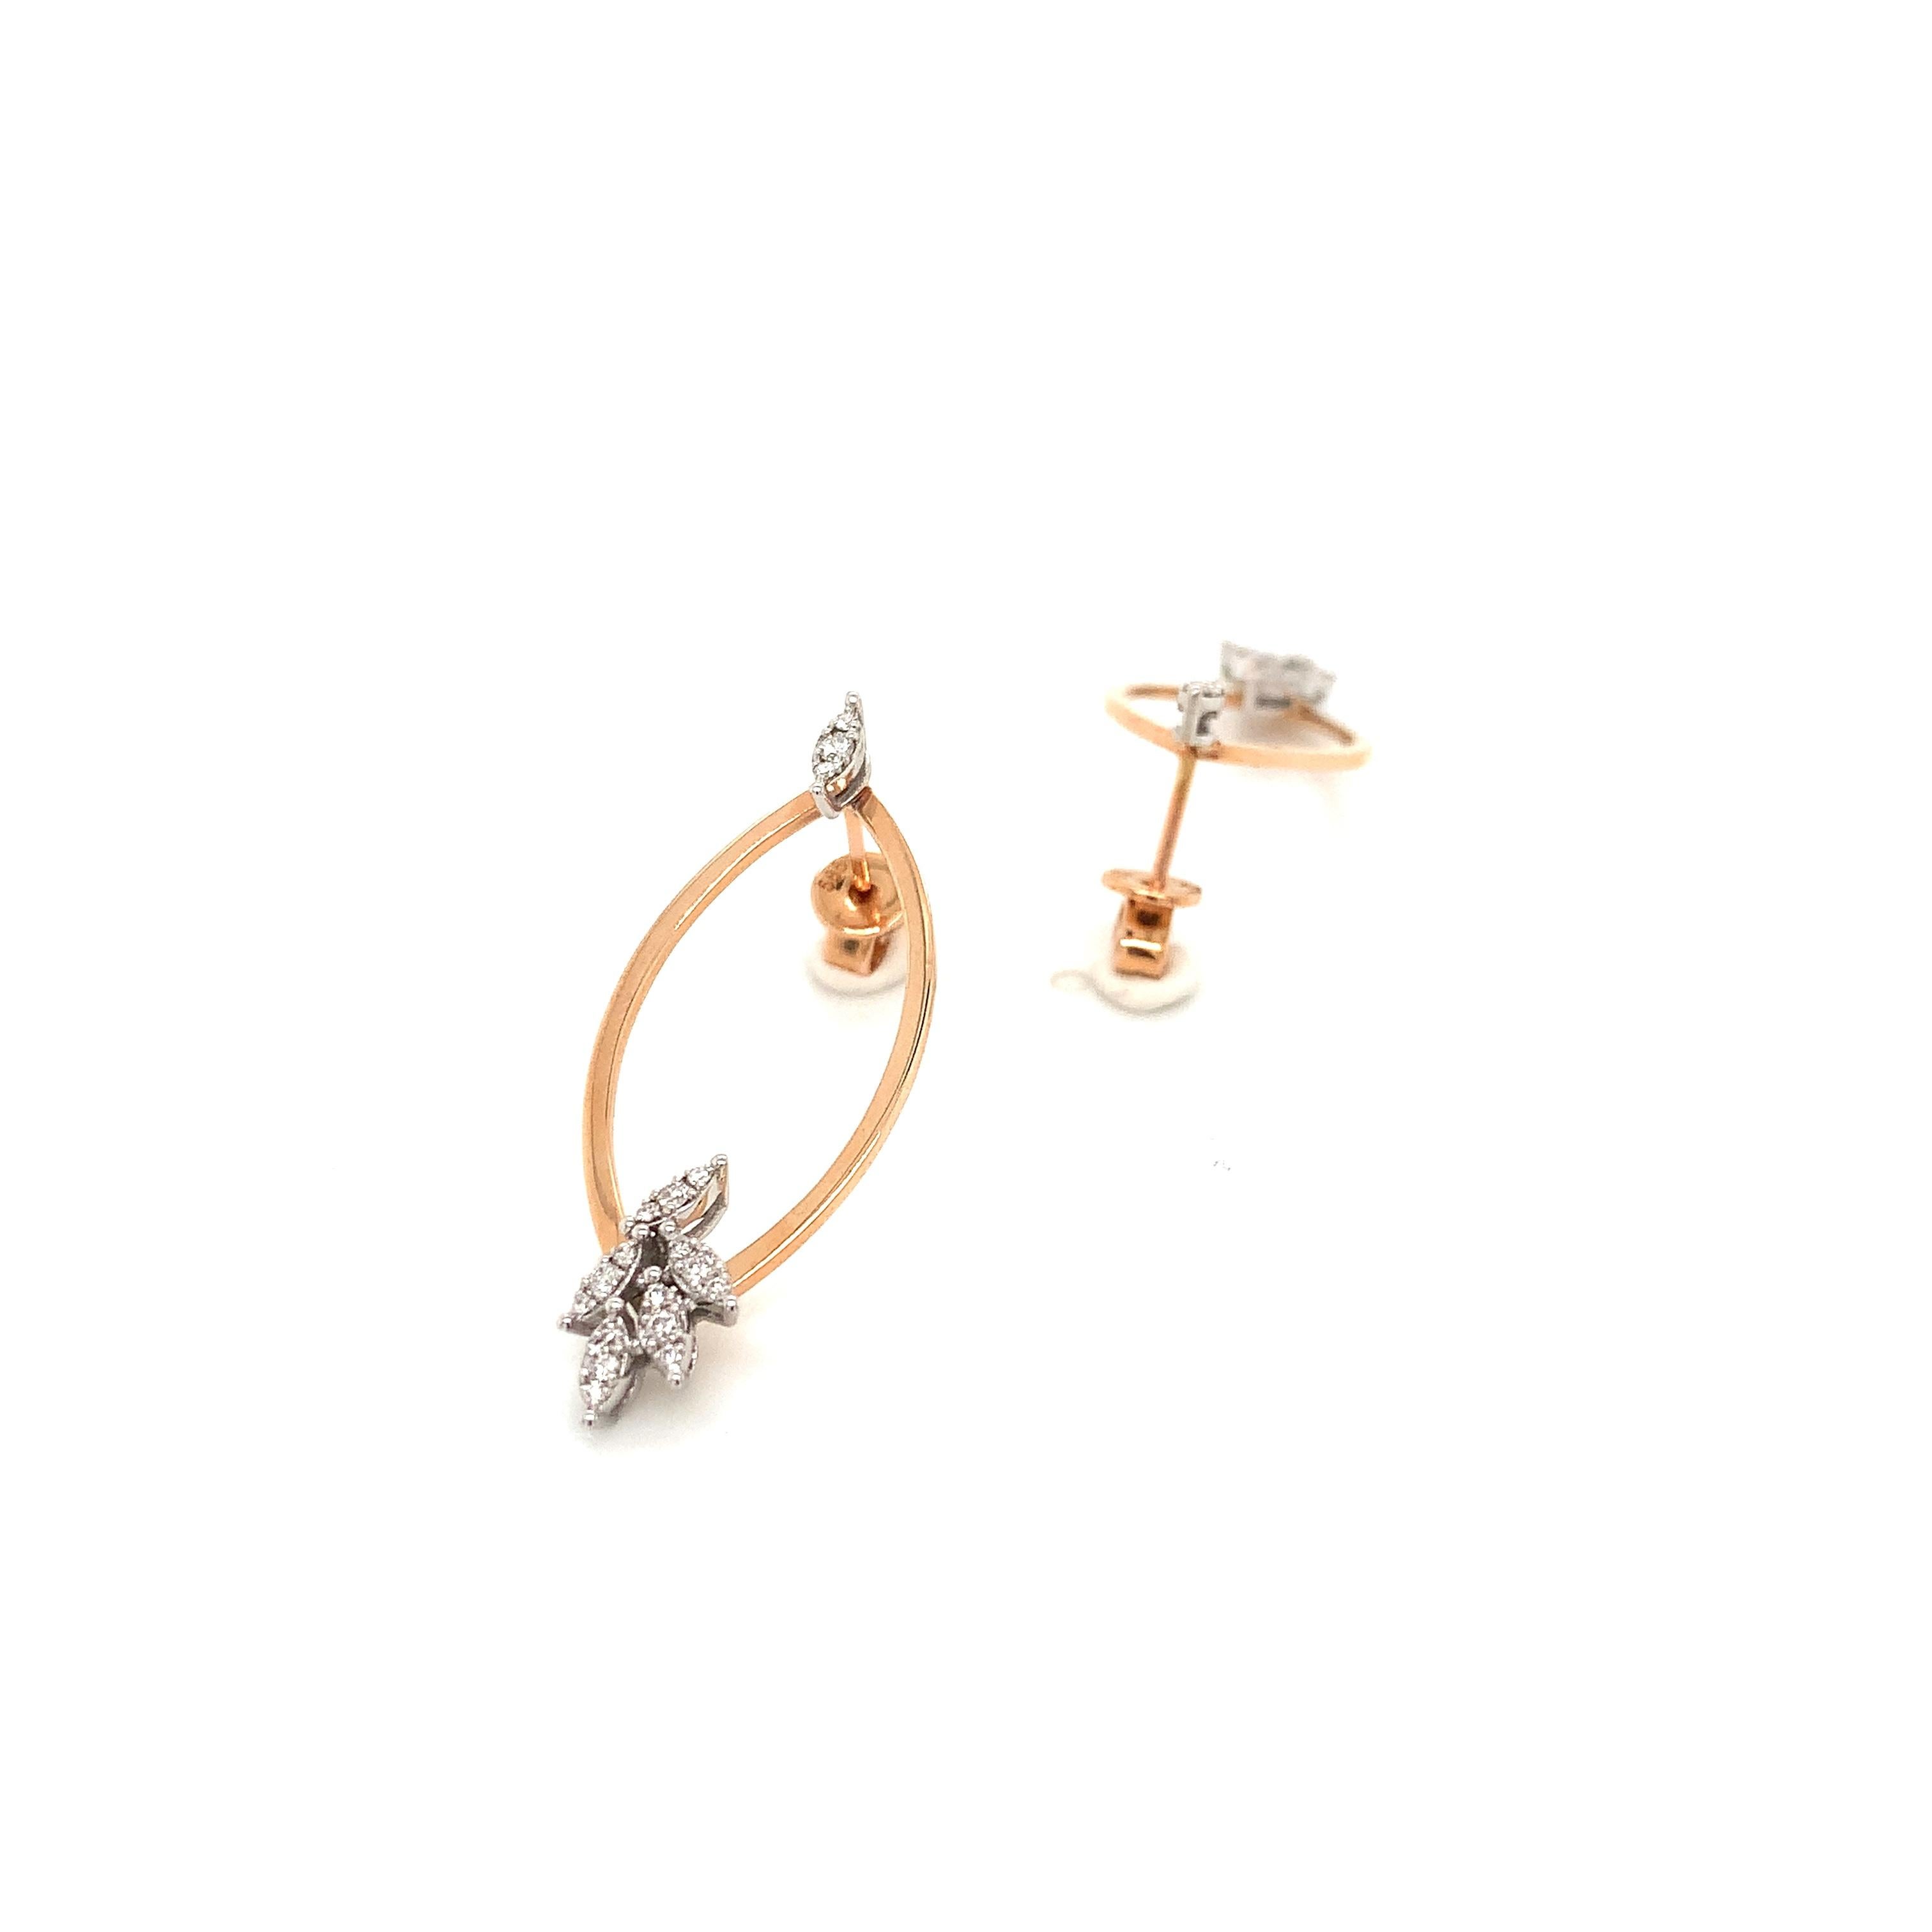 OWN Your Story 14K White and Rose Gold Dual-Use Elliptical Petal Drop Earrings. These stunning drop earrings can be used as featured or just the stud alone. Perfect pair for everyday and a night out!

OWN Your Story brings its 3 generations of